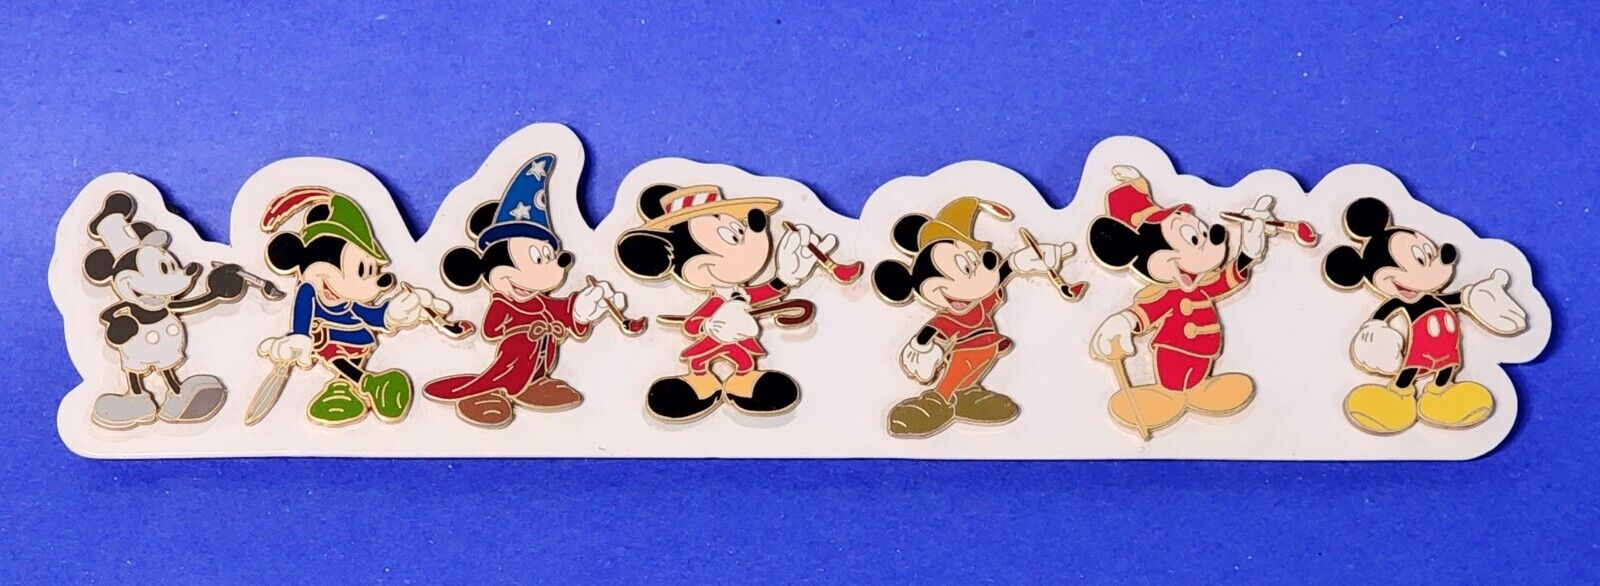 DISNEY AUCTIONS P.I.N.S. MICKEY THRU THE YEARS COMPLETE 7 PIN SET LE 1000